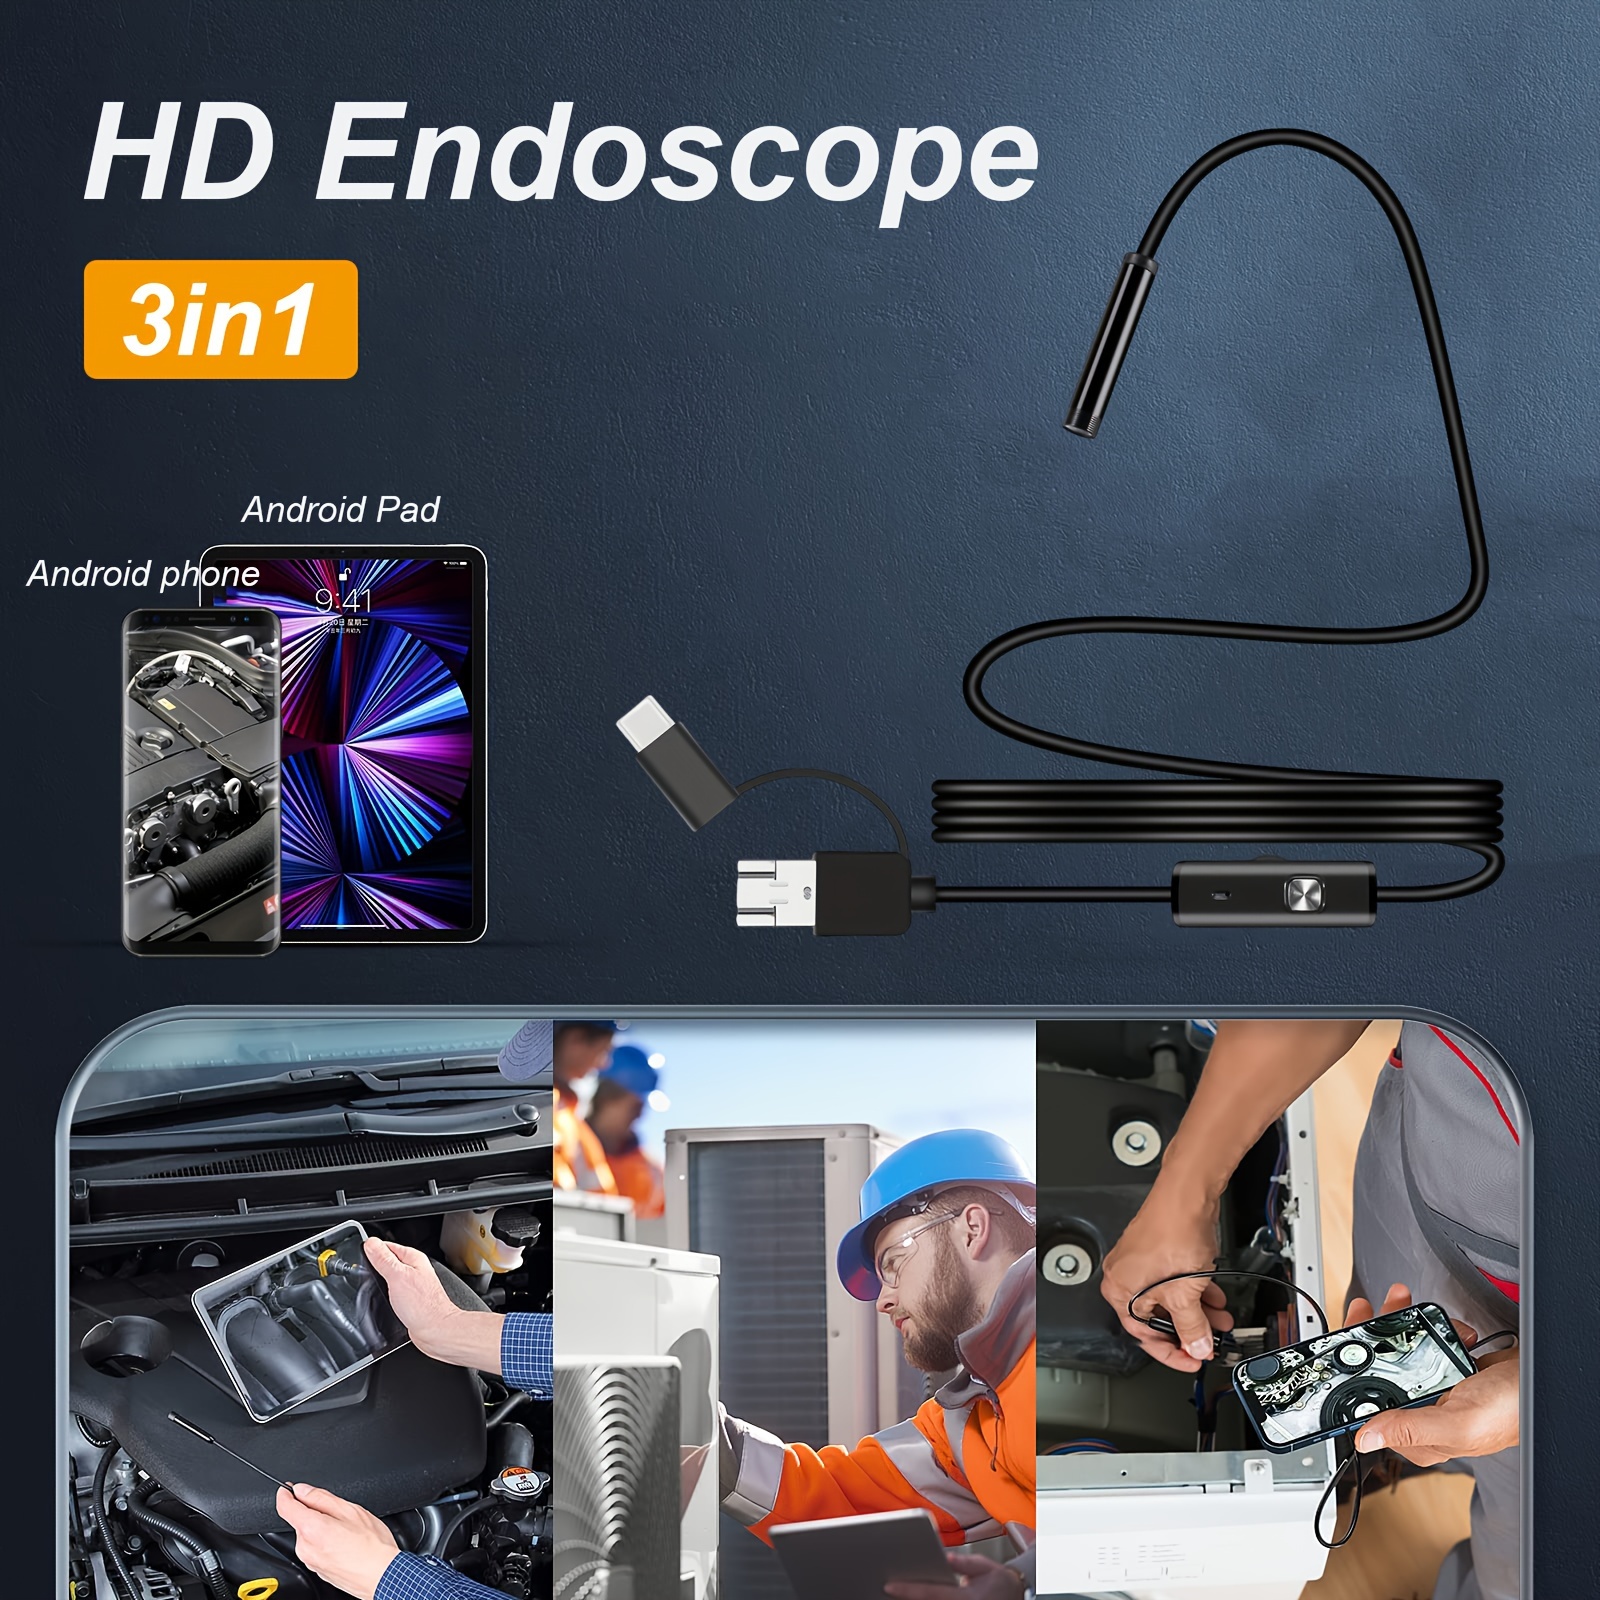 Wireless Endoscope, WiFi Borescope Inspection Camera 2.0 Megapixels HD  Waterproof Snake Camera Pipe Drain with 8 Adjustable Led for Android & iOS  Smartphone iPhone Samsung Tablet-16.4 ft (5M) 